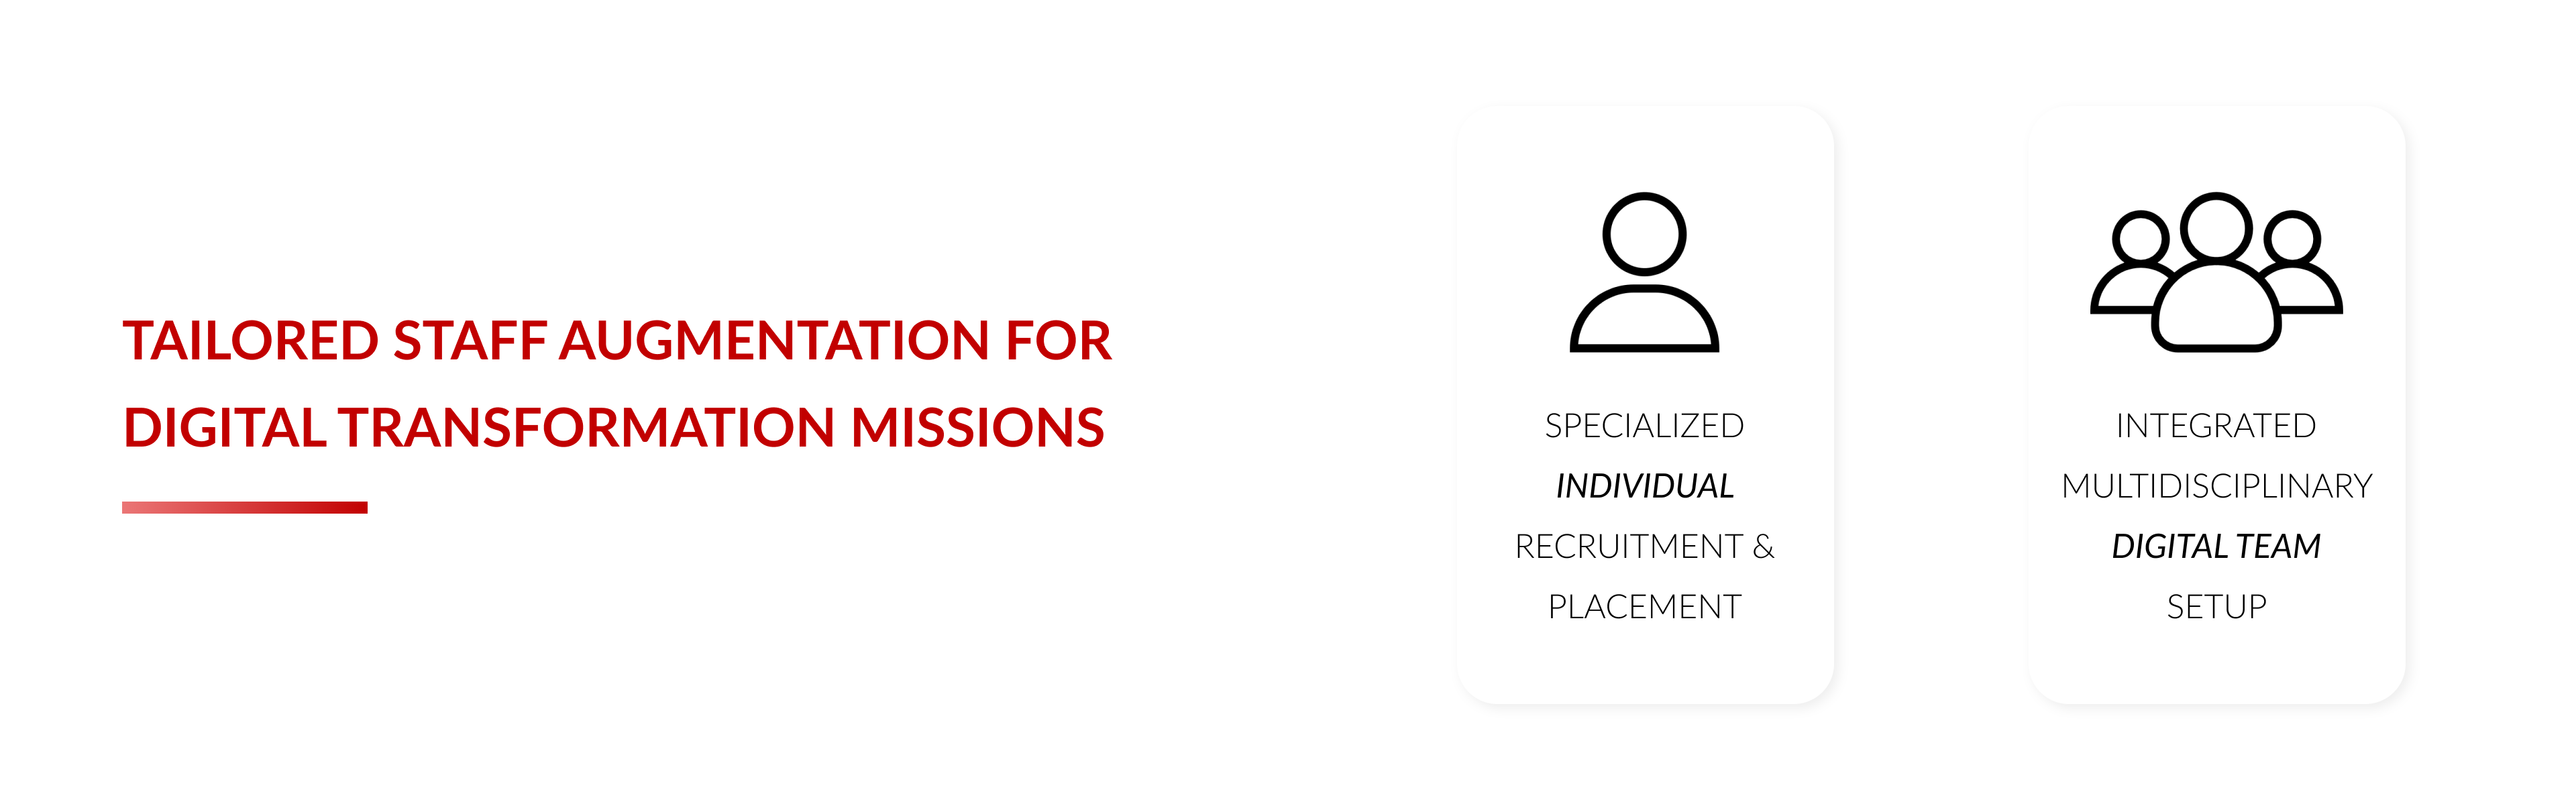 IT Consultis (ITC) offers tailored staff augmentation for digital transformation missions, including specialized individual recruitment & placement and integrated multidisciplinary digital team setup